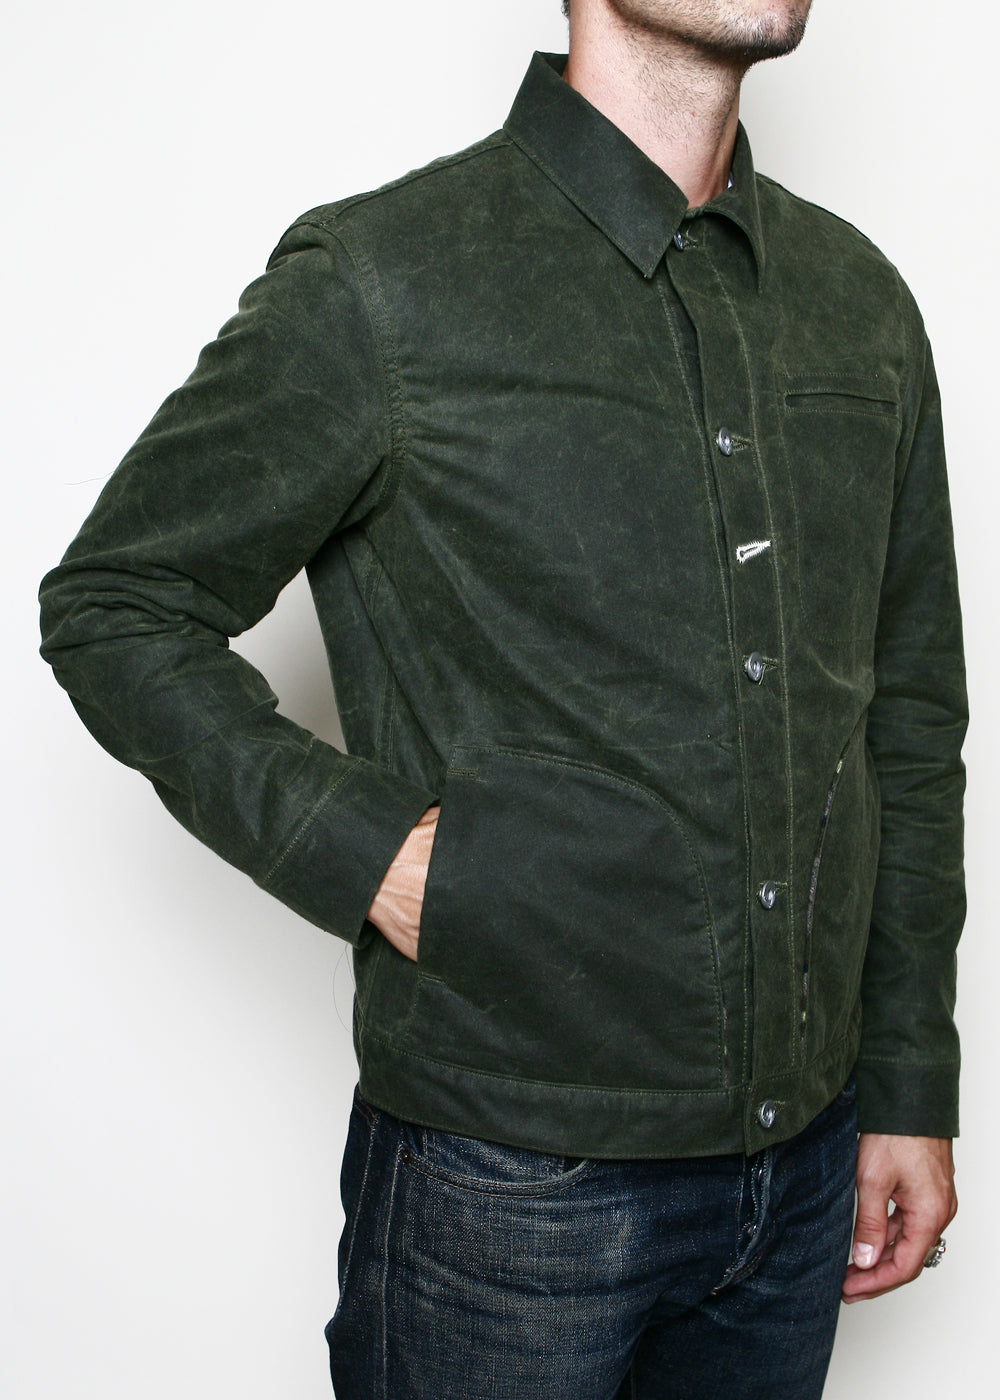 Supply Jacket // Lined Olive Ridgeline – Rogue Territory